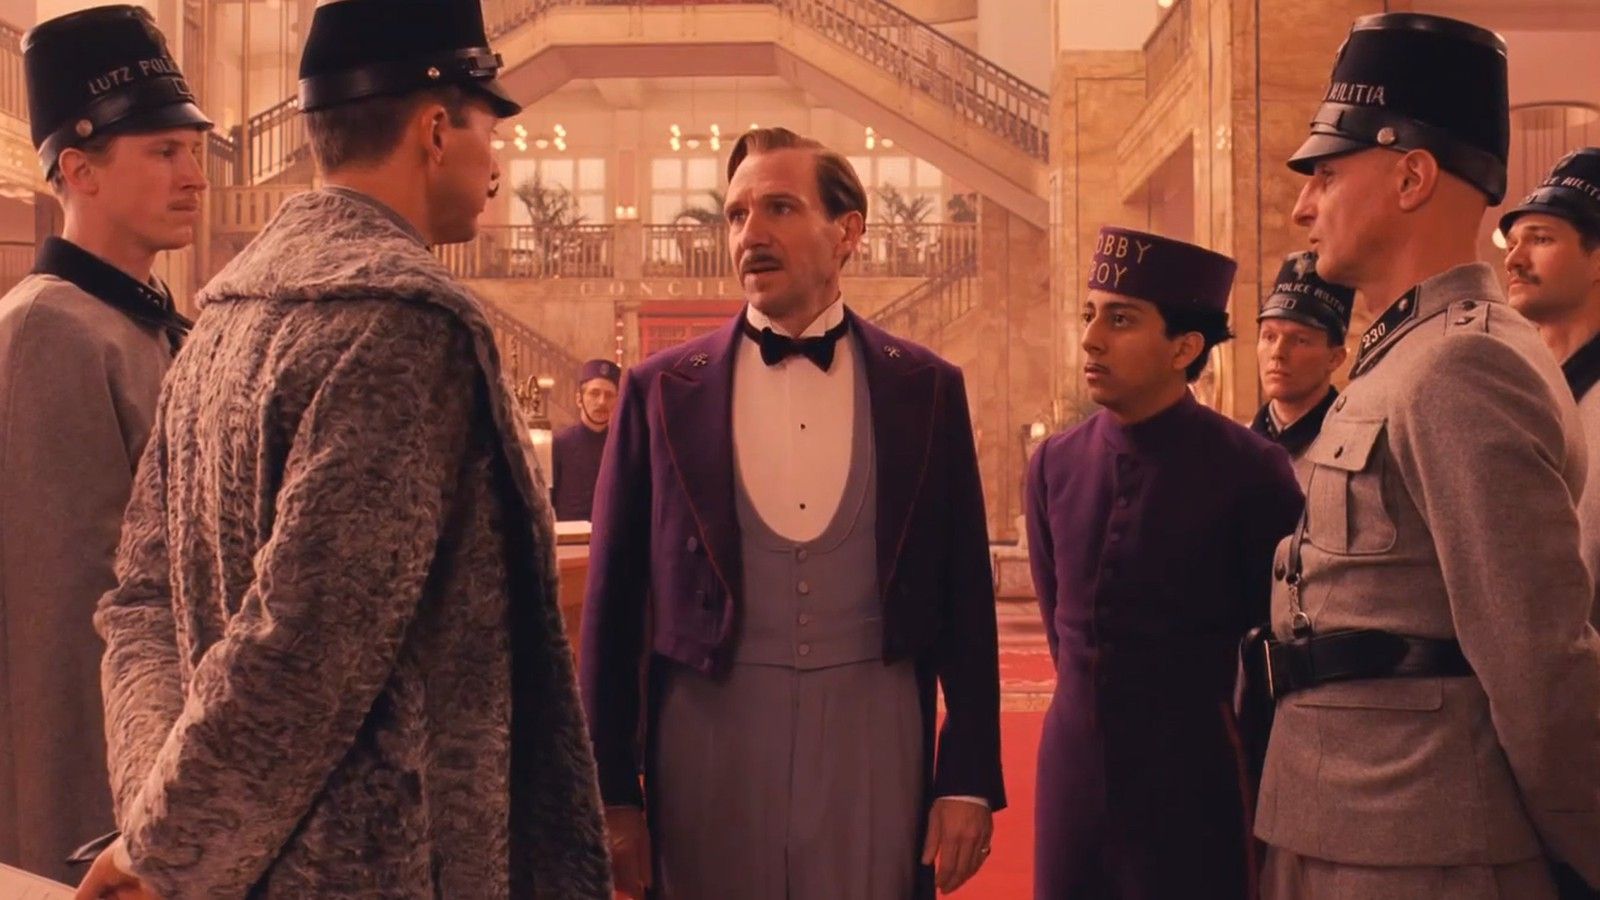 <p>                     Creating his own country gave Wes Anderson a freedom to build the world of <em><strong>The Grand Budapest Hotel</strong></em> that is rich in detail, foreign but welcoming; not least of all because of the performance by Ralph Fiennes as the titular hotel’s famed concierge. Fiennes gives one of the best performances in any Anderson film (<em>the</em> best for my money) as a man who strives to be civilized in every aspect of his life, even as the world crumbles around him at the outset of war. Other new Anderson players including Saoirse Ronan and Tony Revolori fit like a glove among staples Bill Murray, Jeff Goldblum, Edward Norton, Adrien Brody and Willem Dafoe. Anderson’s story within a story within a story structure also allows him to raise the bar in terms of style, playing with different aspect ratios throughout. Both technically and thematically, Anderson has never been better than he was in <em><strong>The Grand Budapest Hotel</strong></em>.                    </p>